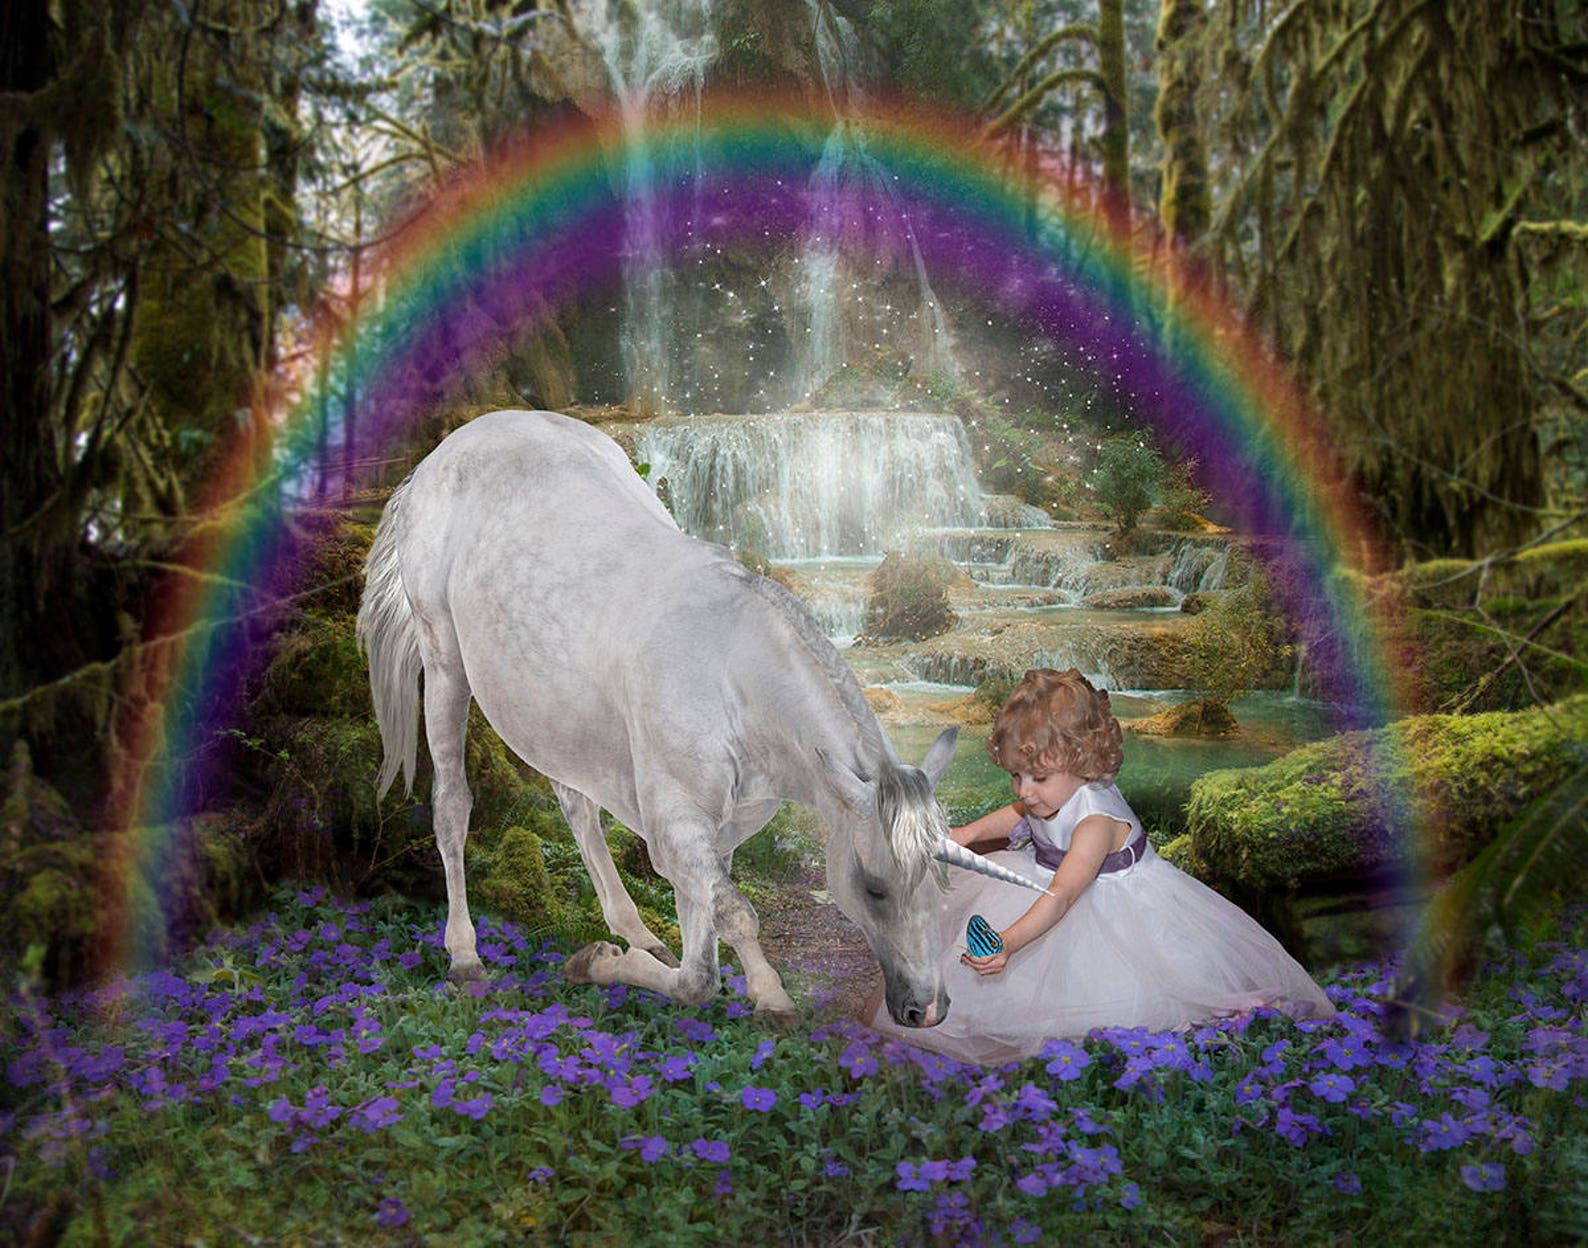 Unicorn Overlays And Special Fx Etsy